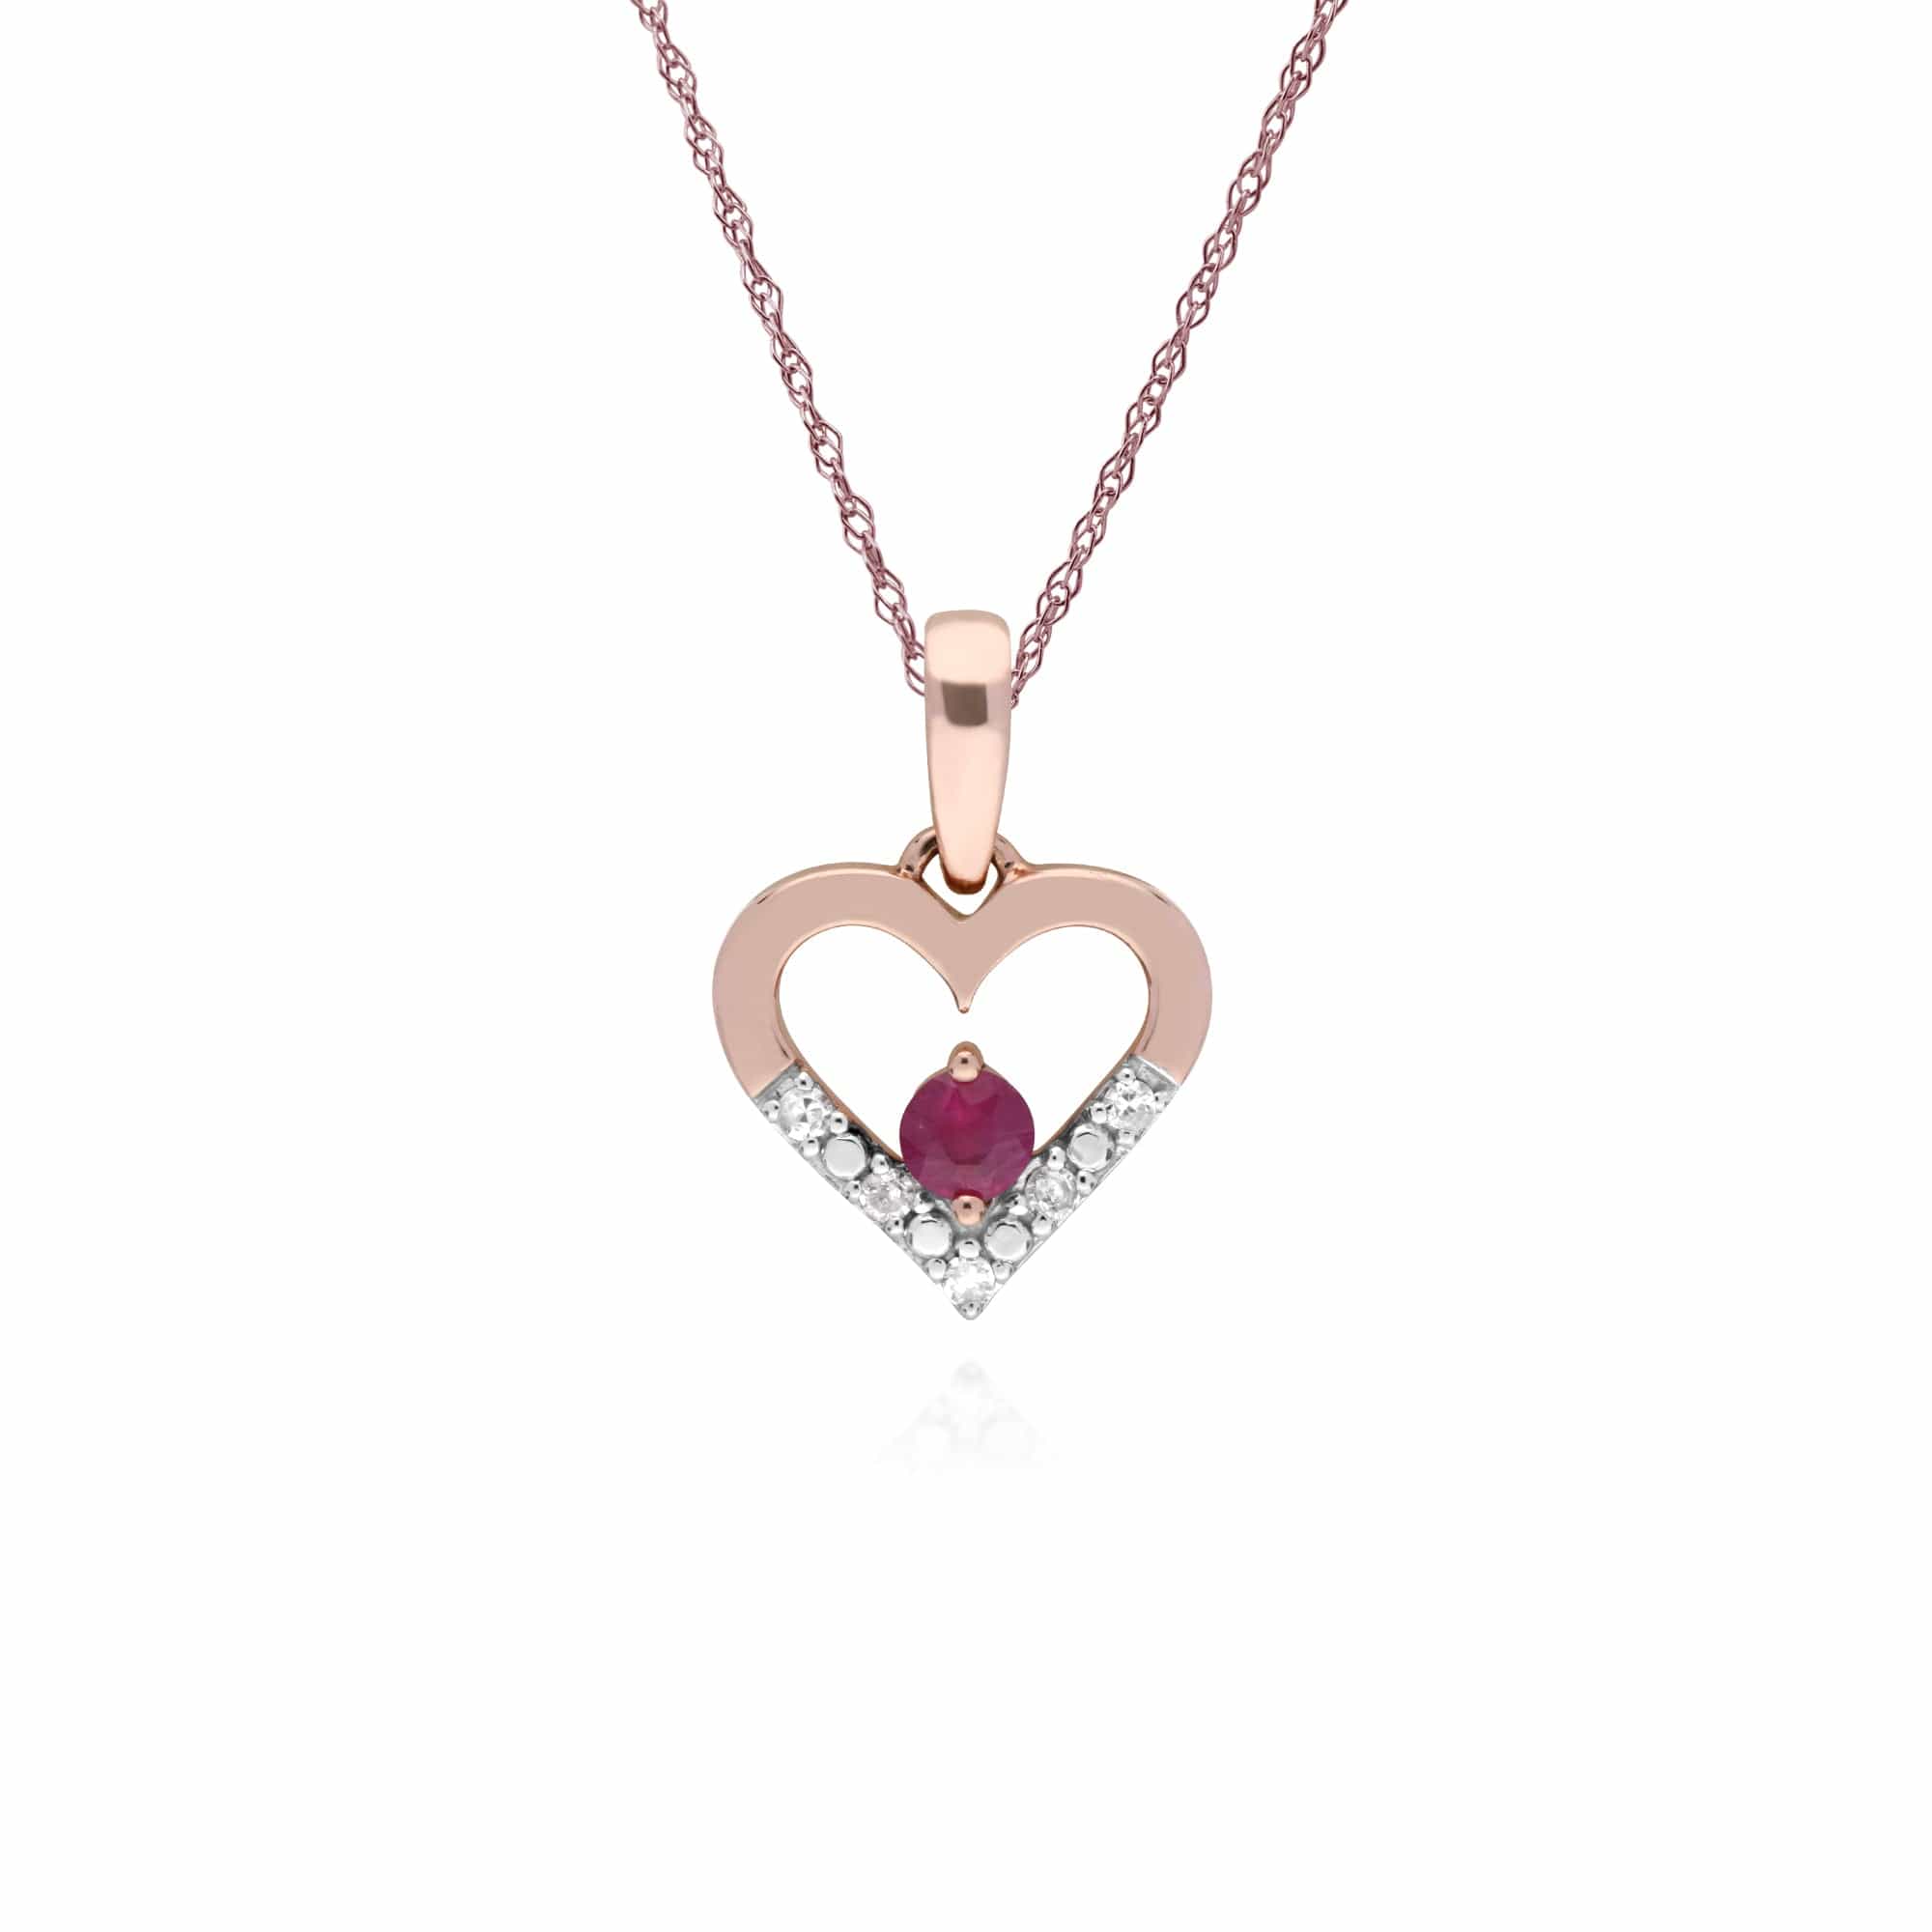 135E1580019-135P1921019 Classic Round Ruby & Diamond Heart Drop Earrings & Pendant Set in 9ct Rose Gold 3